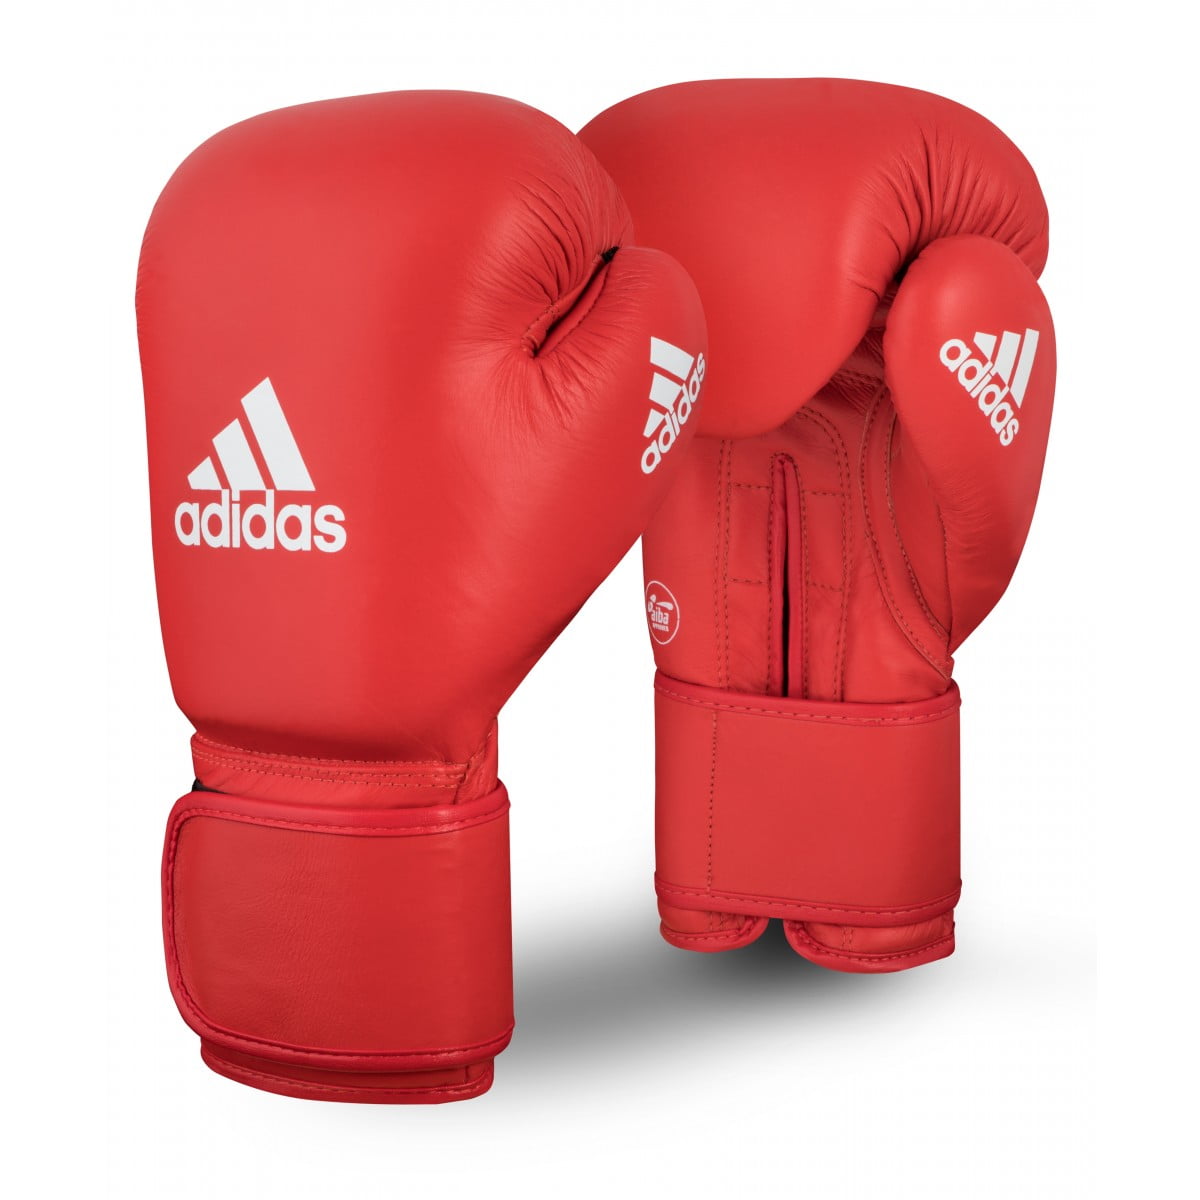 adidas boxing competition headgear